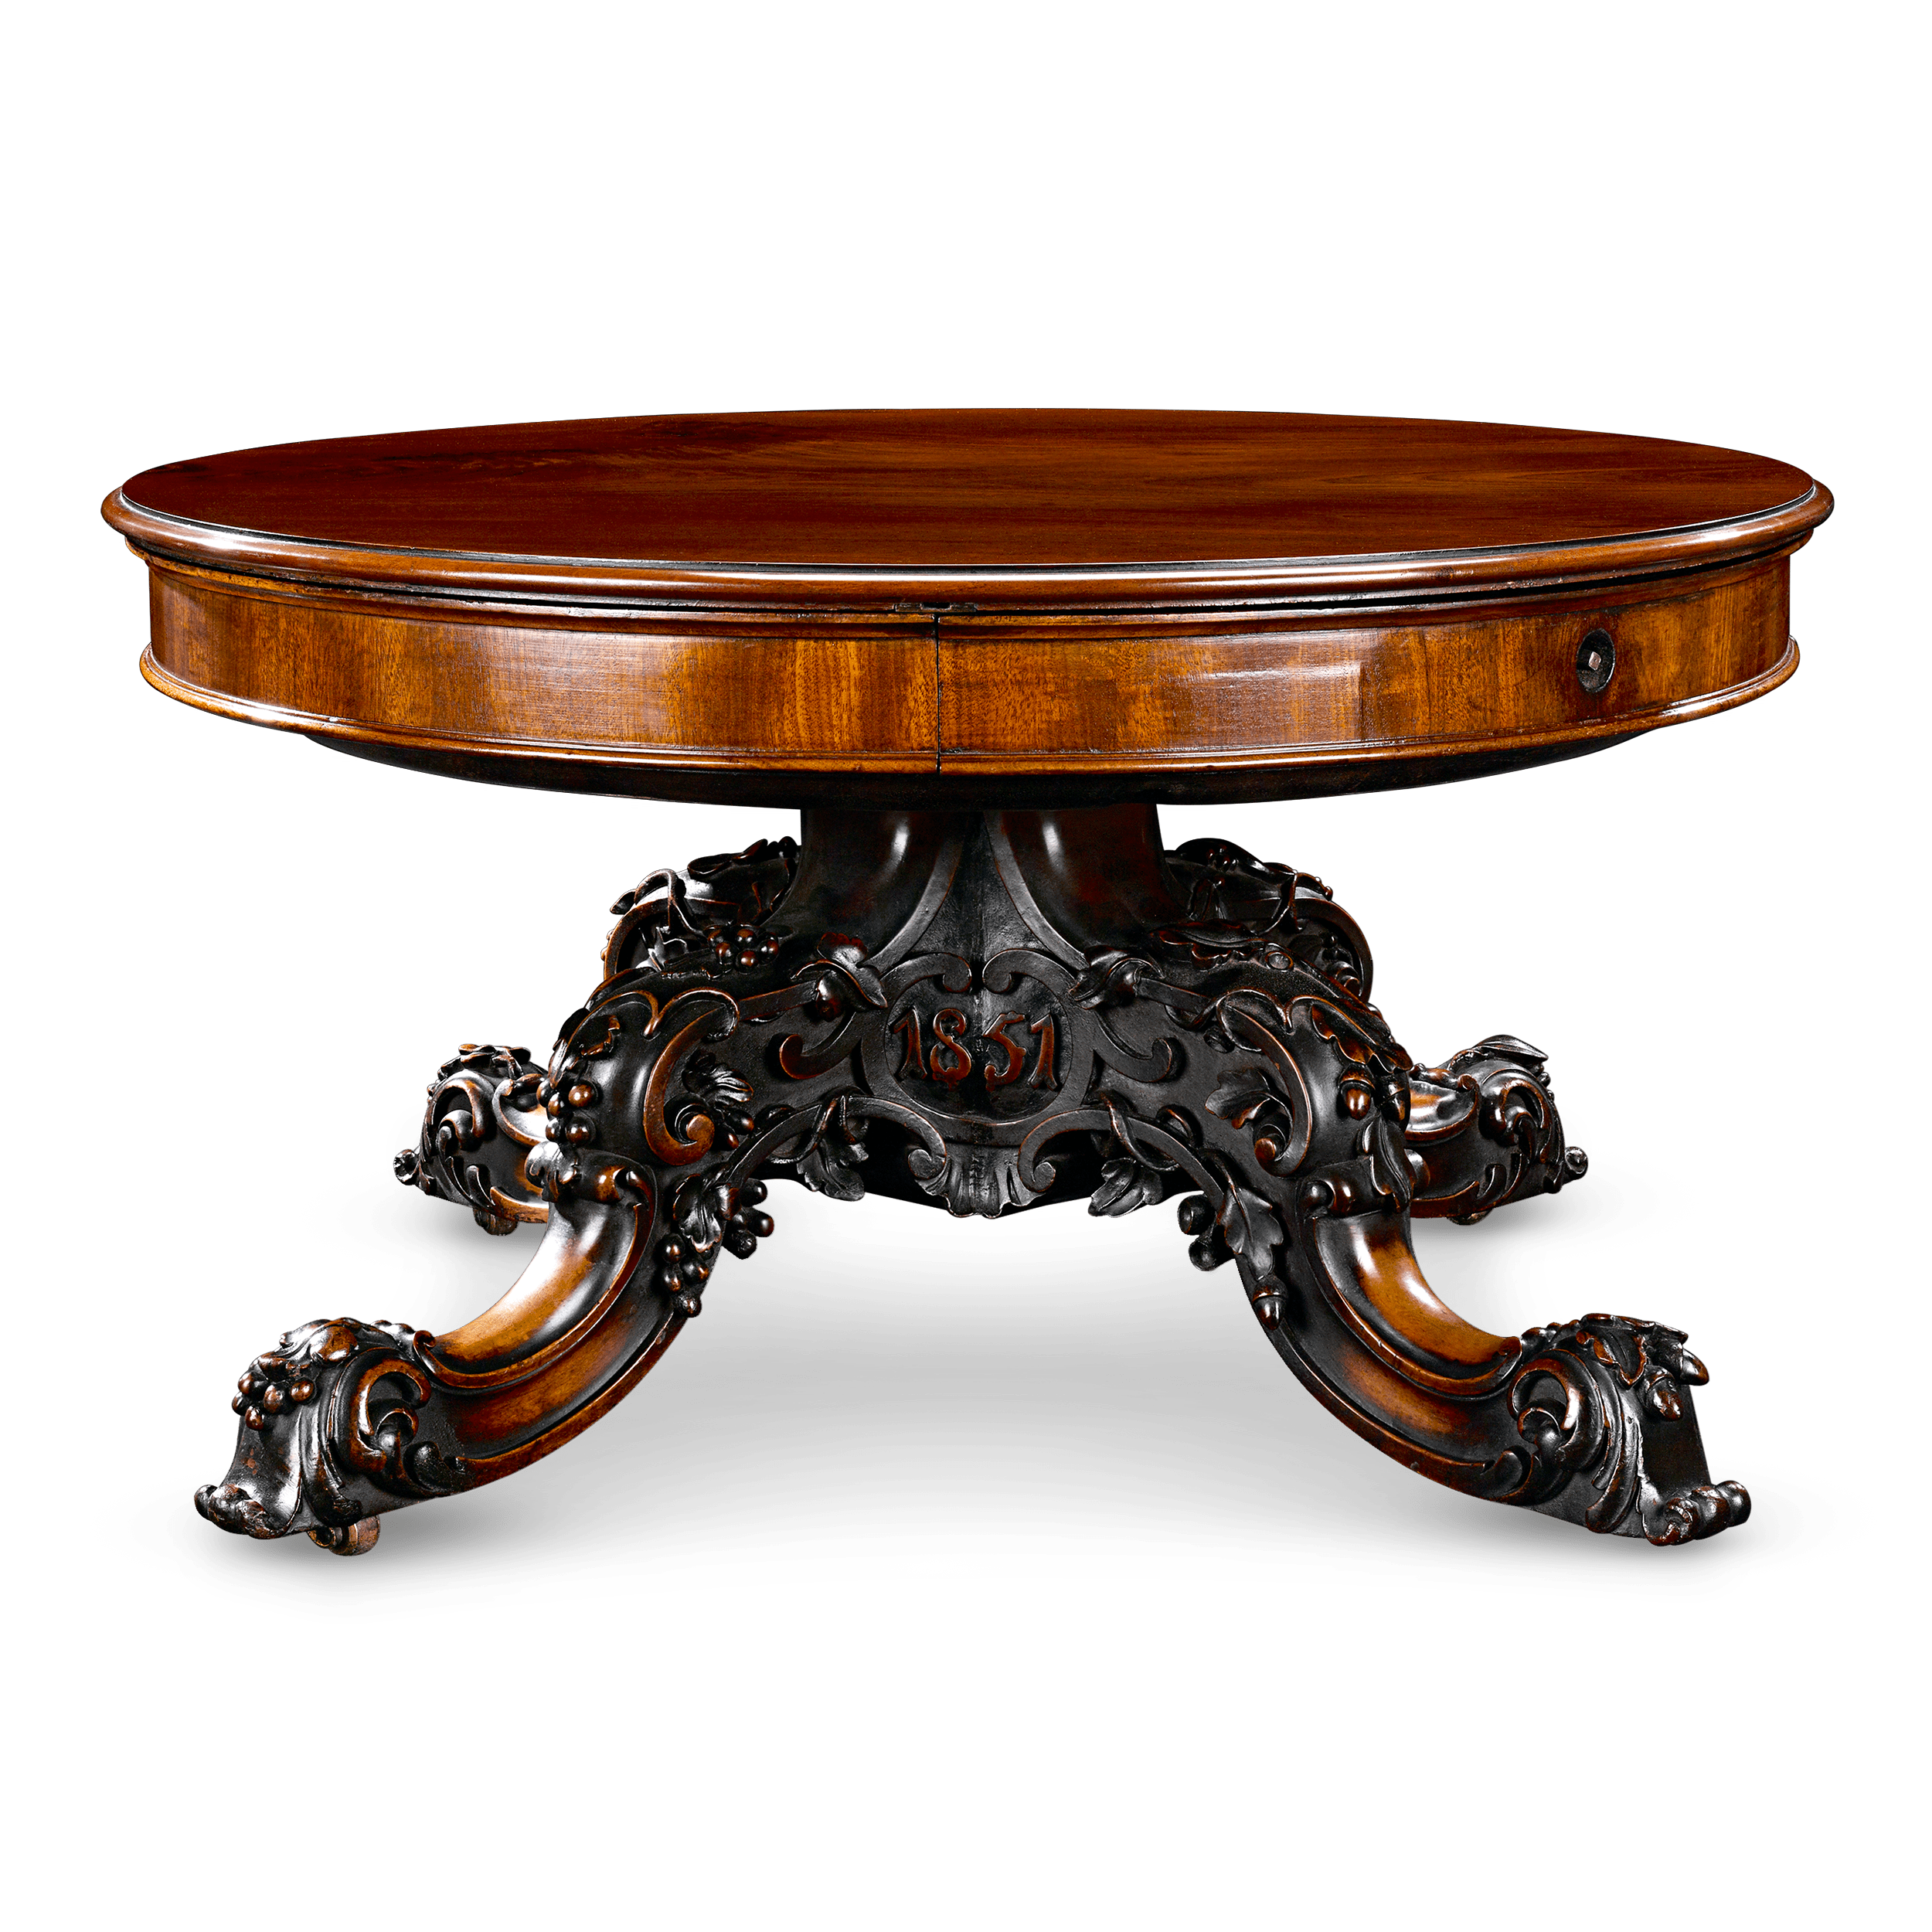 This one-of-a-kind mahogany table is a rare treasure of English cabinetmaking